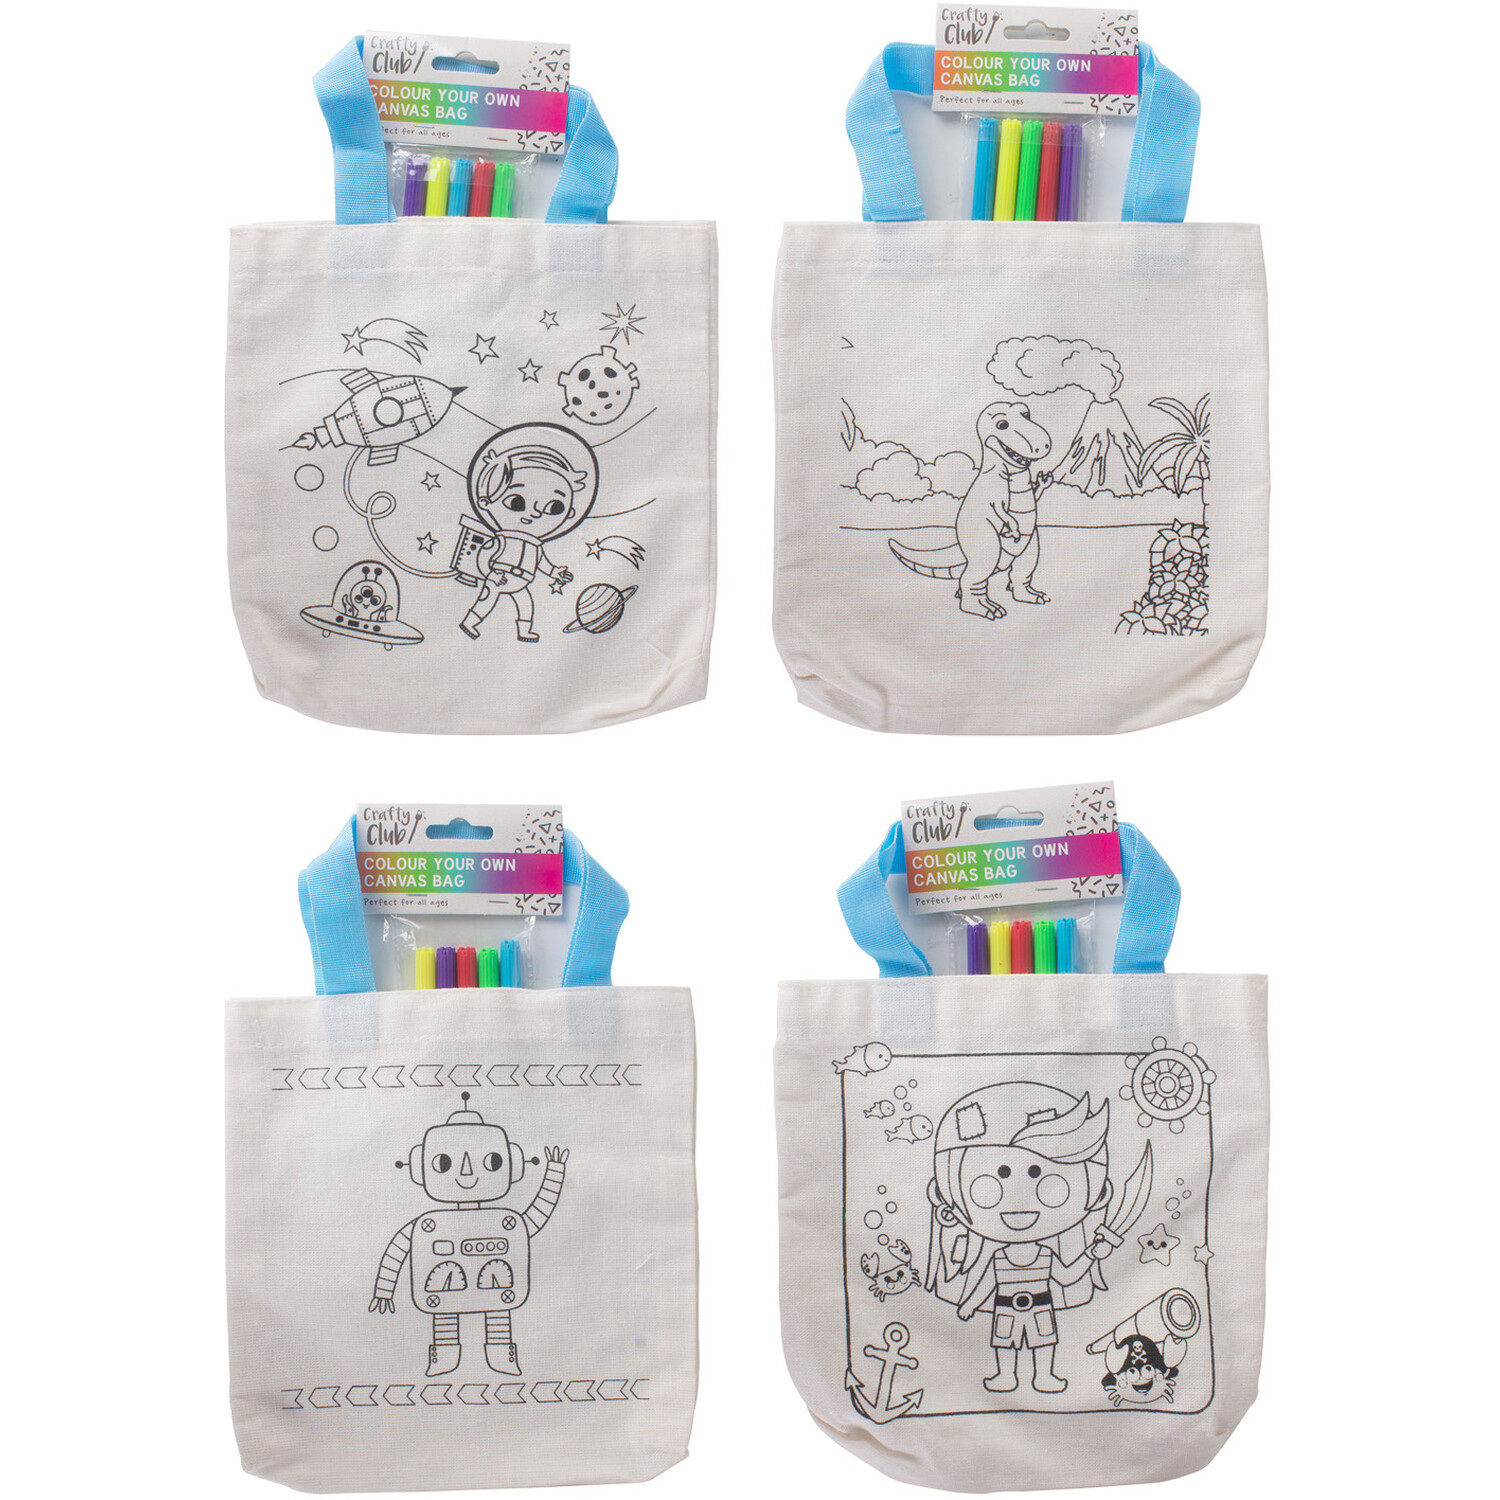 Single Kreative Kids Colour Your Own Canvas Bag Kit in Assorted styles Image 2